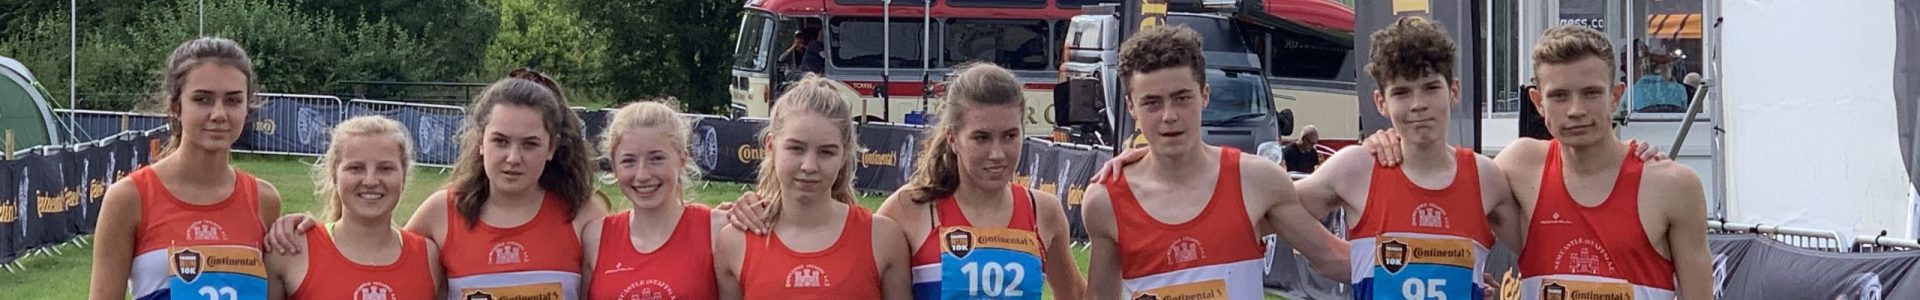 U/20’s claim Gold at the Midlands Cross Country Championships – 28/1/2018